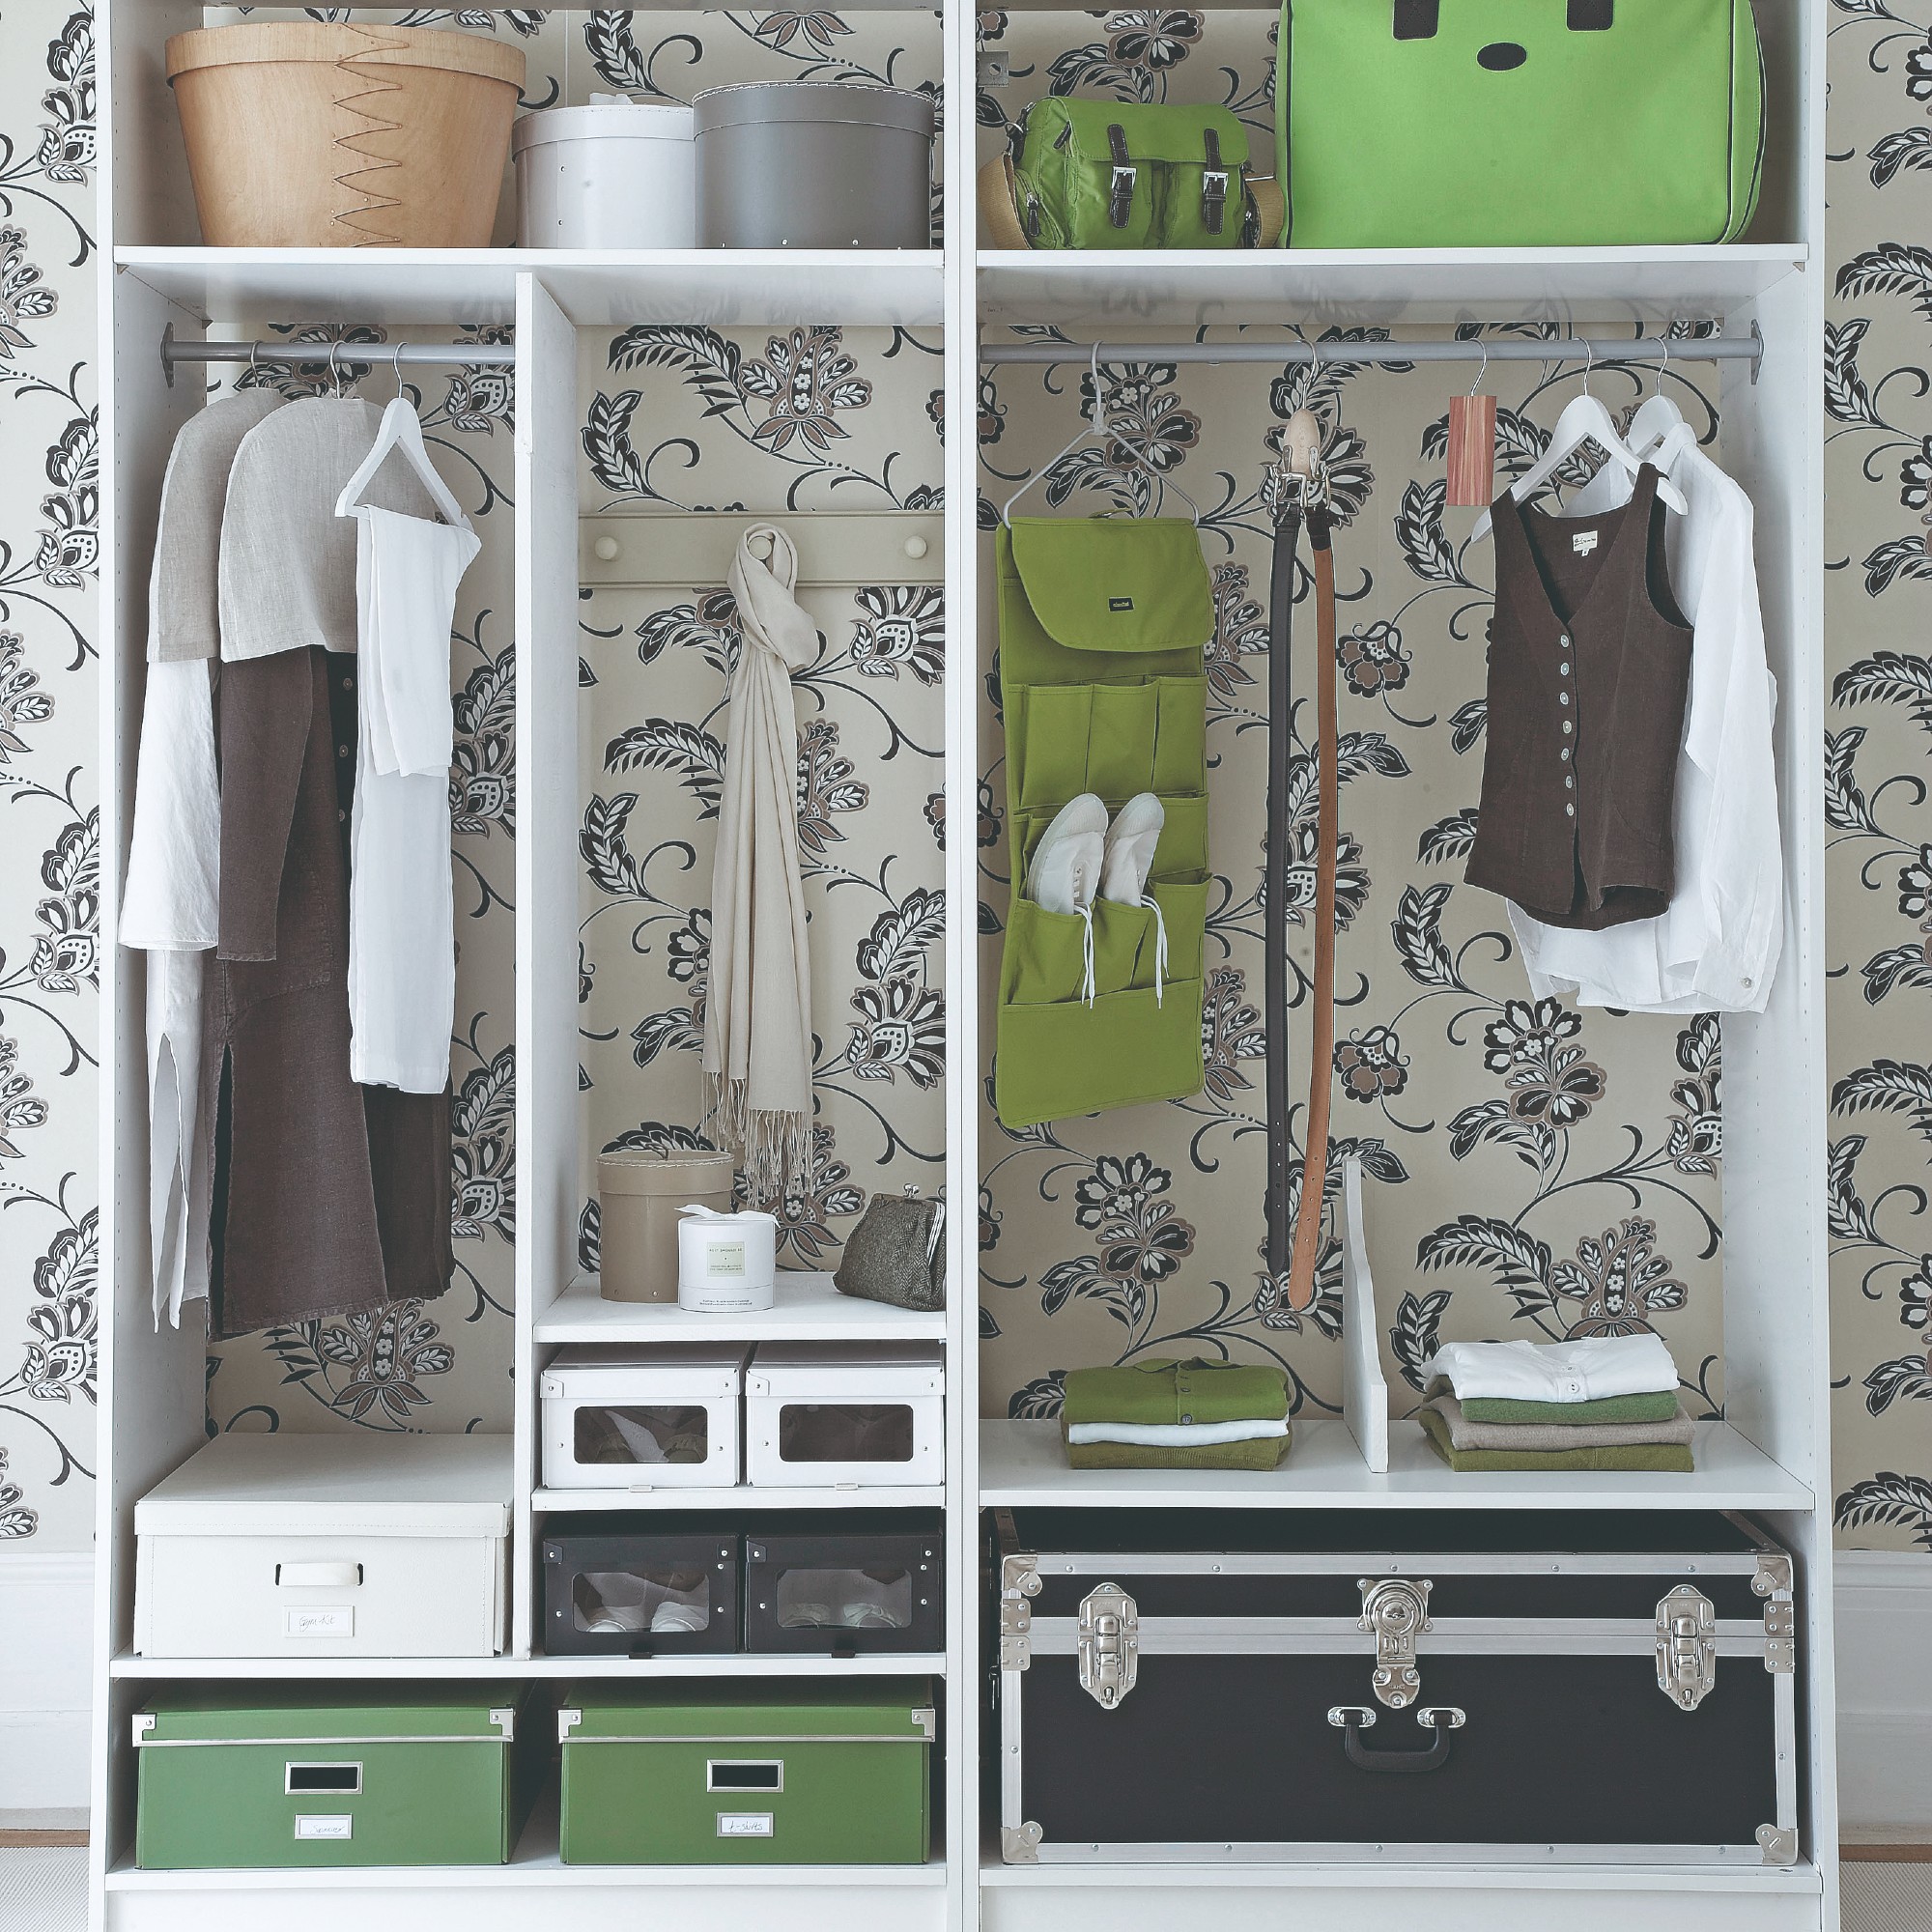 A tidy and organised wardrobe against a floral wallpaper